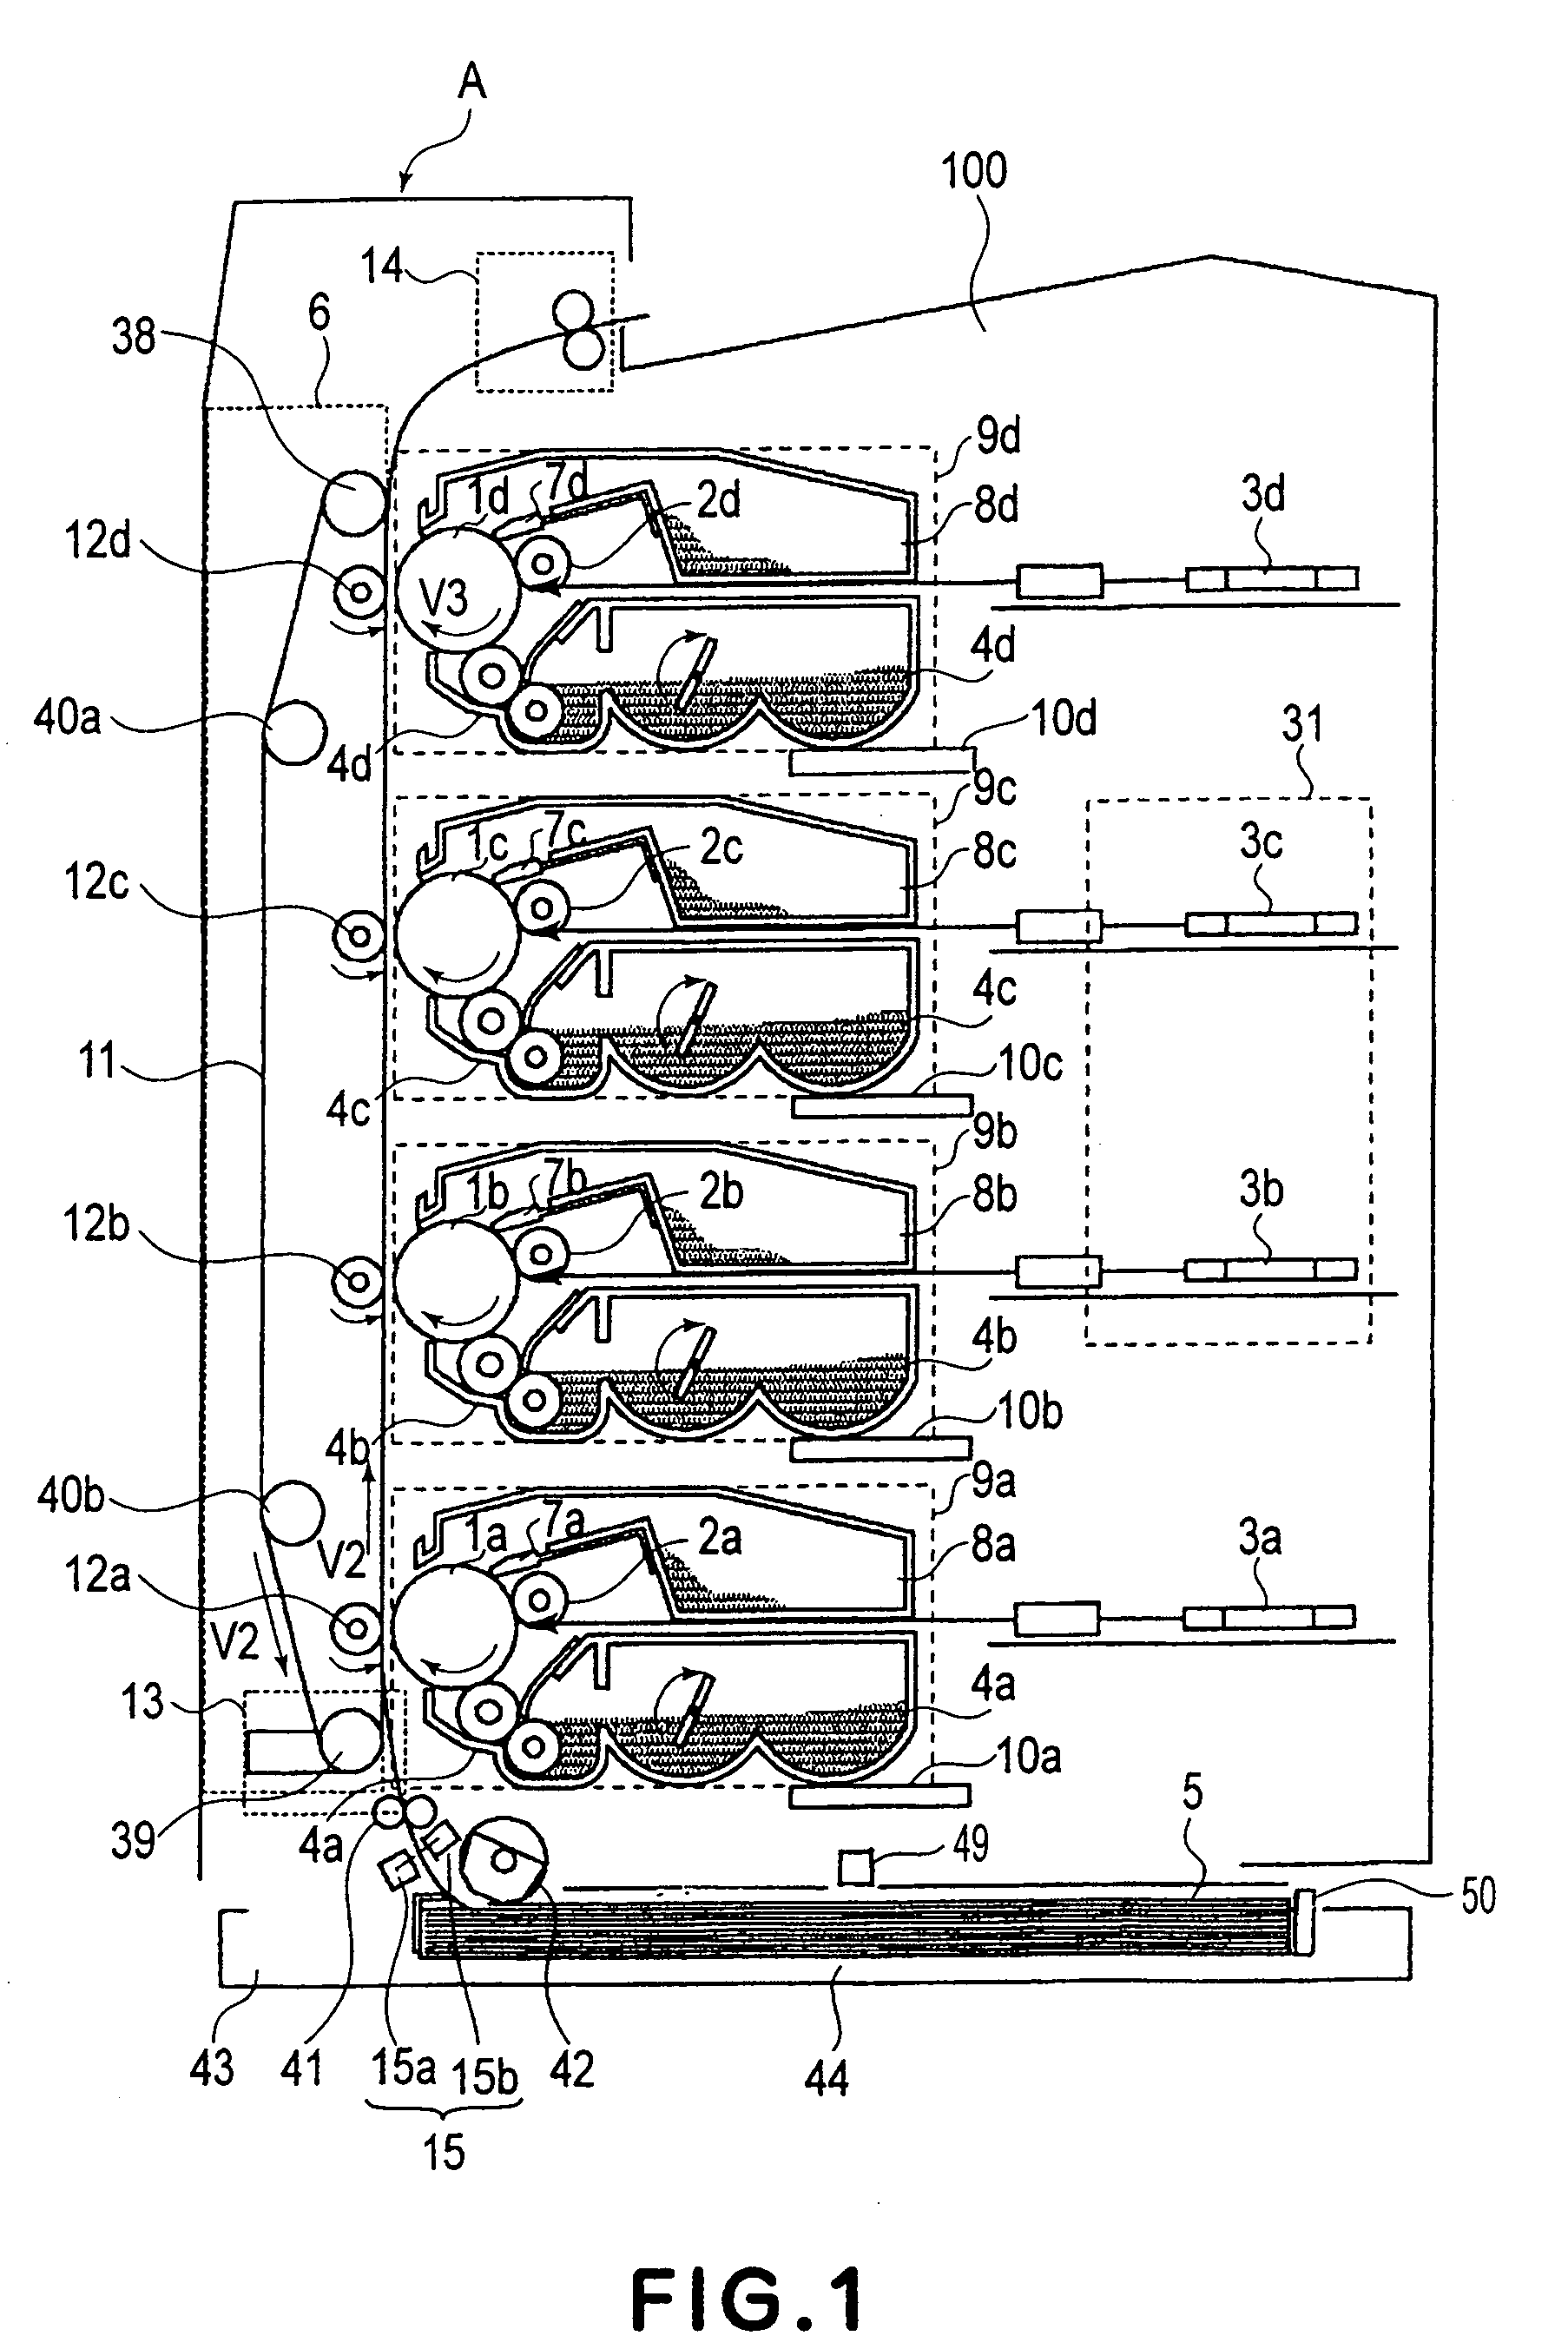 Image forming apparatus switching developing rollers of mounted process cartridges between contact and spaced states and switching the contact position of a feeding belt contactable to drums of the mounted cartridges